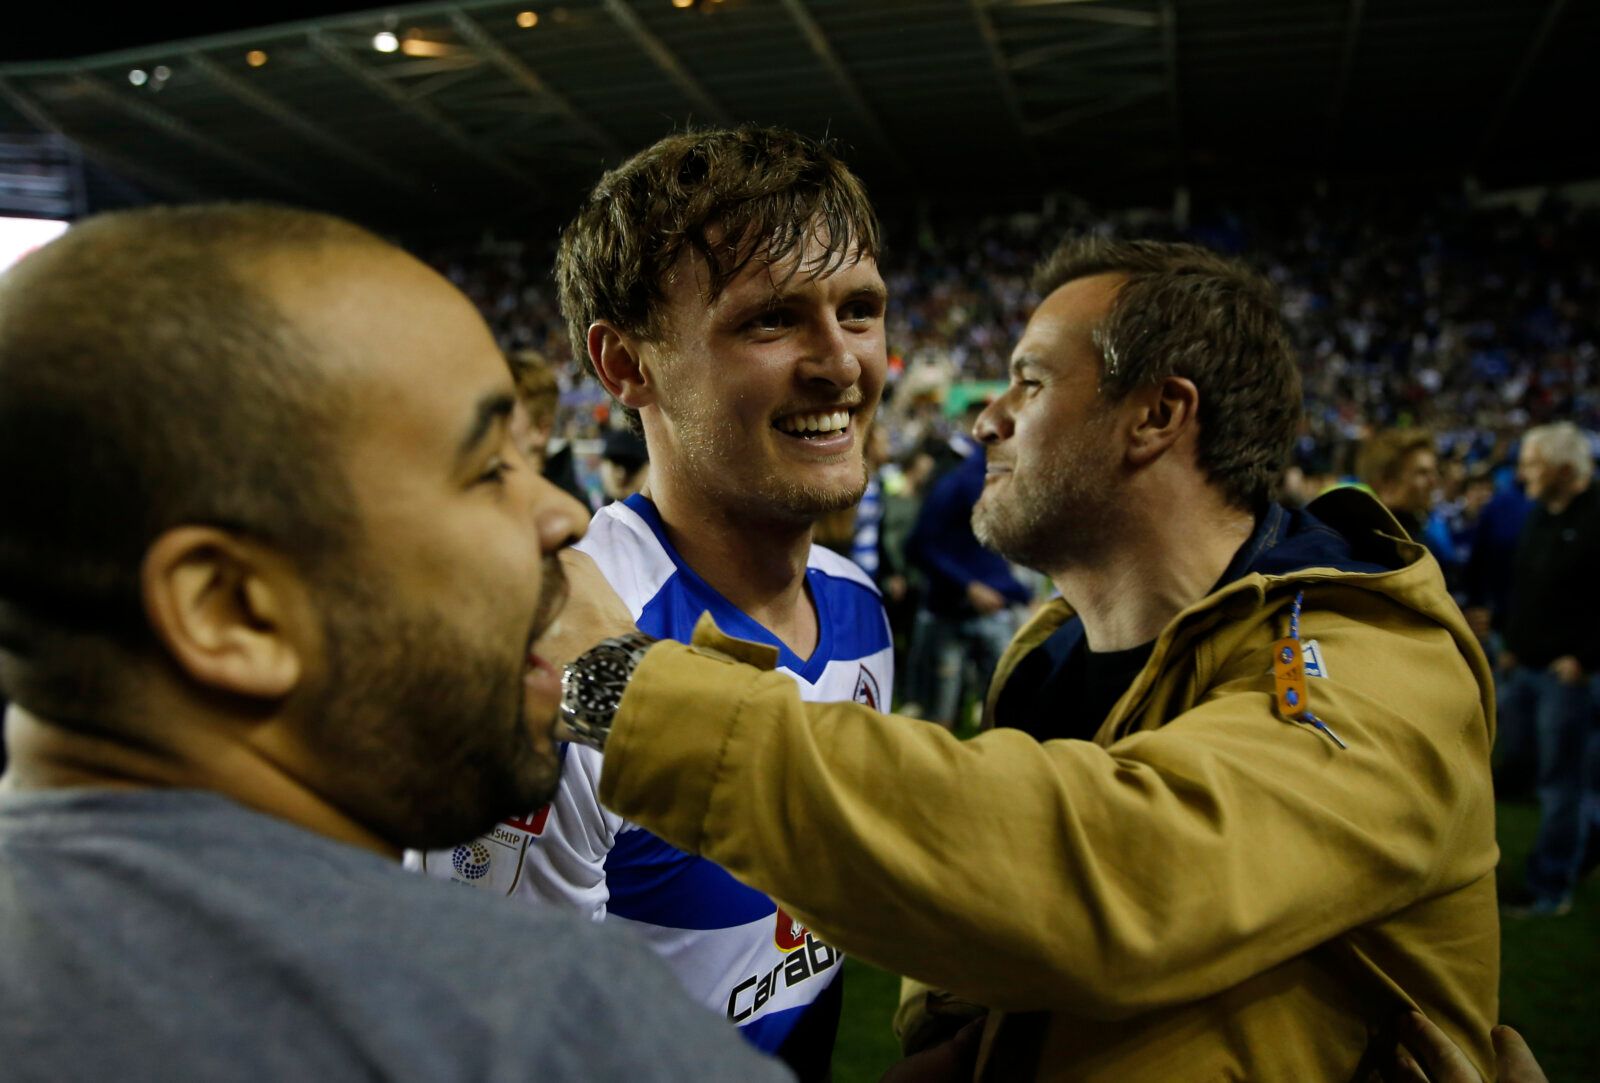 Britain Football Soccer - Reading v Fulham - Sky Bet Championship Play Off Semi Final Second Leg - The Madejski Stadium - 16/5/17 Reading’s John Swift celebrates at the end of the match after reaching the Play Off final Action Images via Reuters / Matthew Childs Livepic EDITORIAL USE ONLY. No use with unauthorized audio, video, data, fixture lists, club/league logos or 